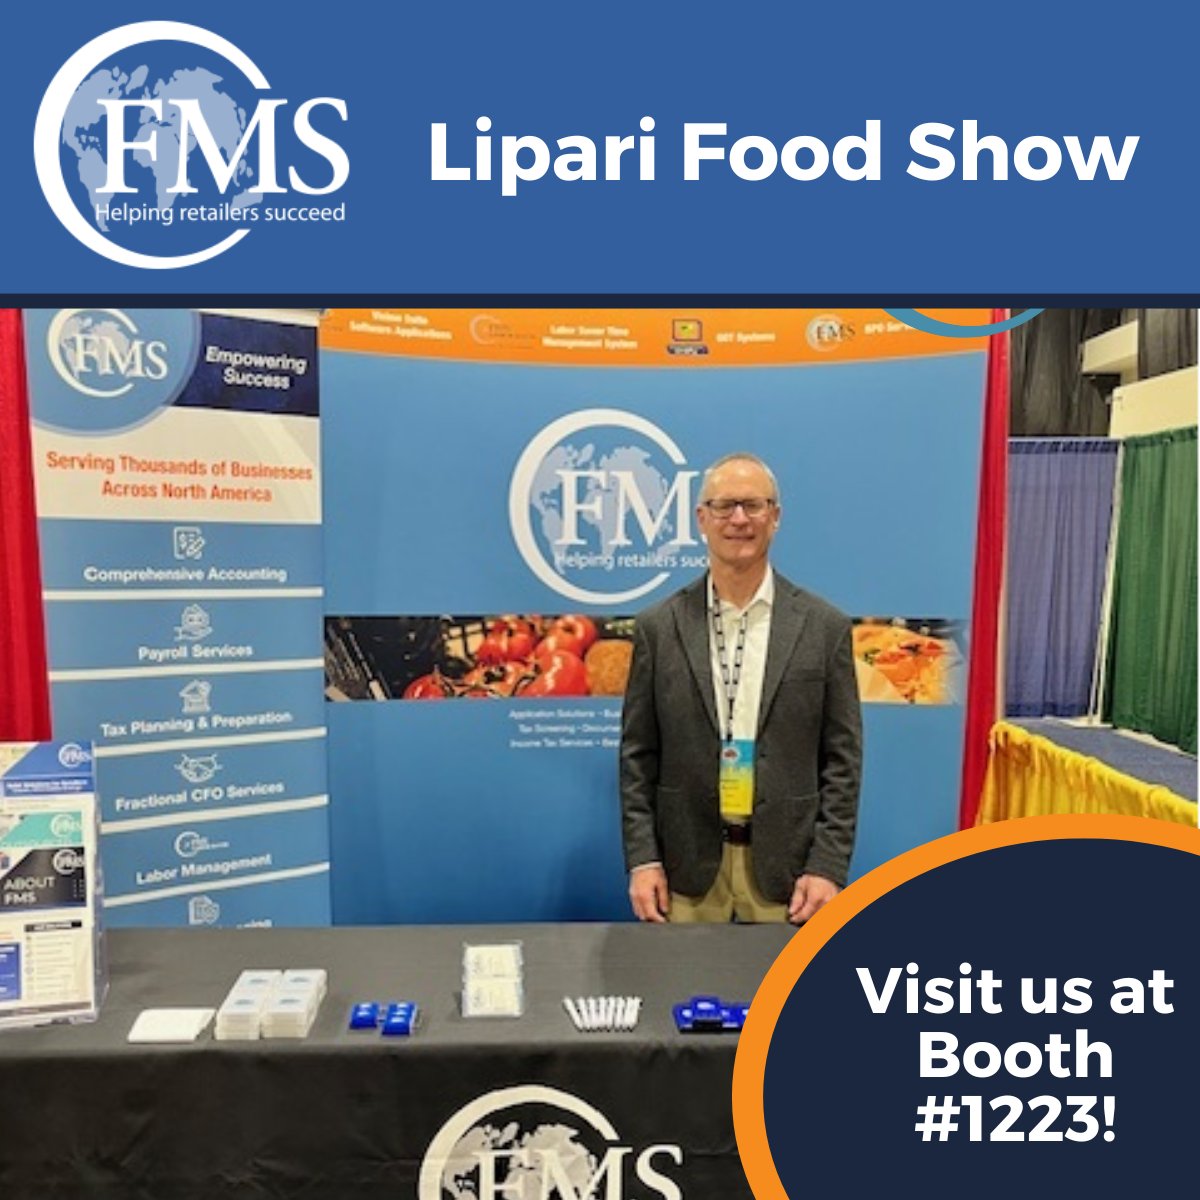 Come see us today at the Lipari Food Show in booth #1223 ! We've got exciting updates and innovative solutions tailor-made for your business. Let's connect!
#FMSsolutions #GOTsystems #IndependentRetailers #FoodShow